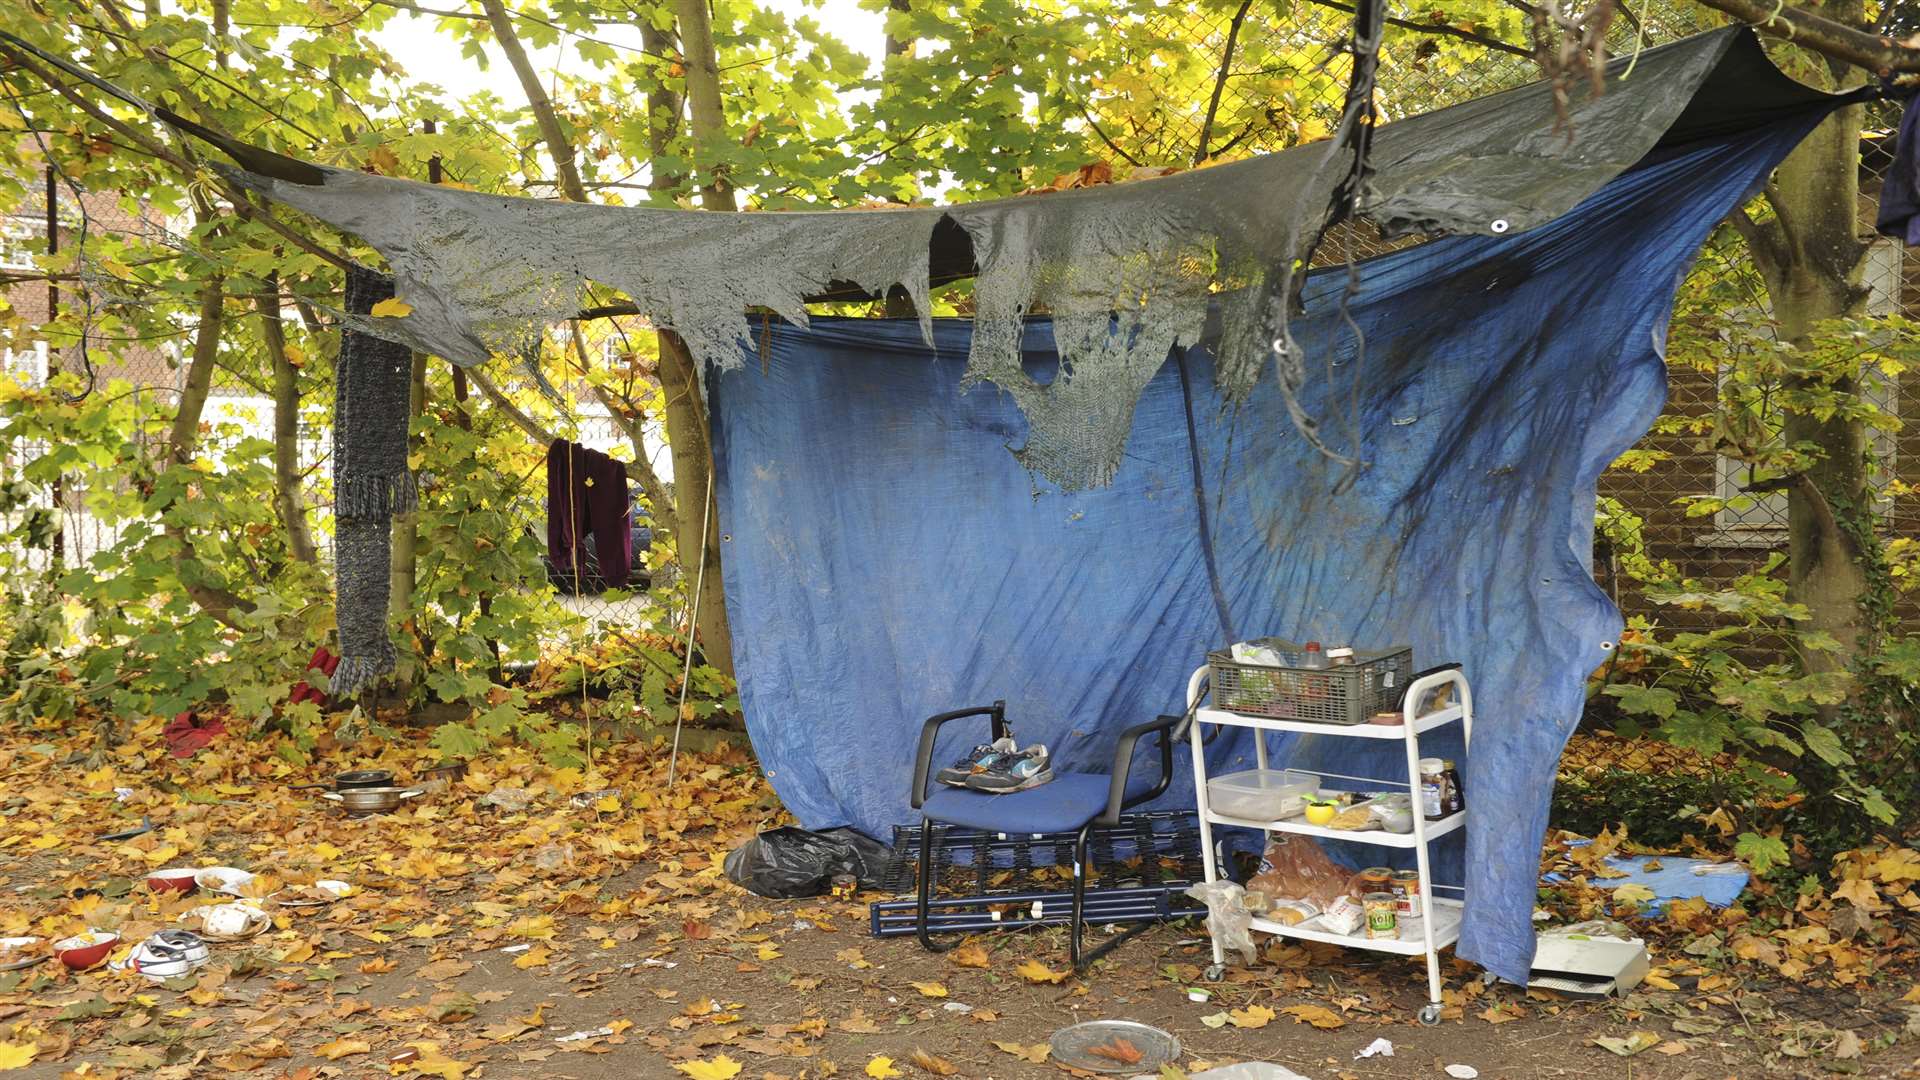 A homeless camp in Medway. Picture: Steve Crispe